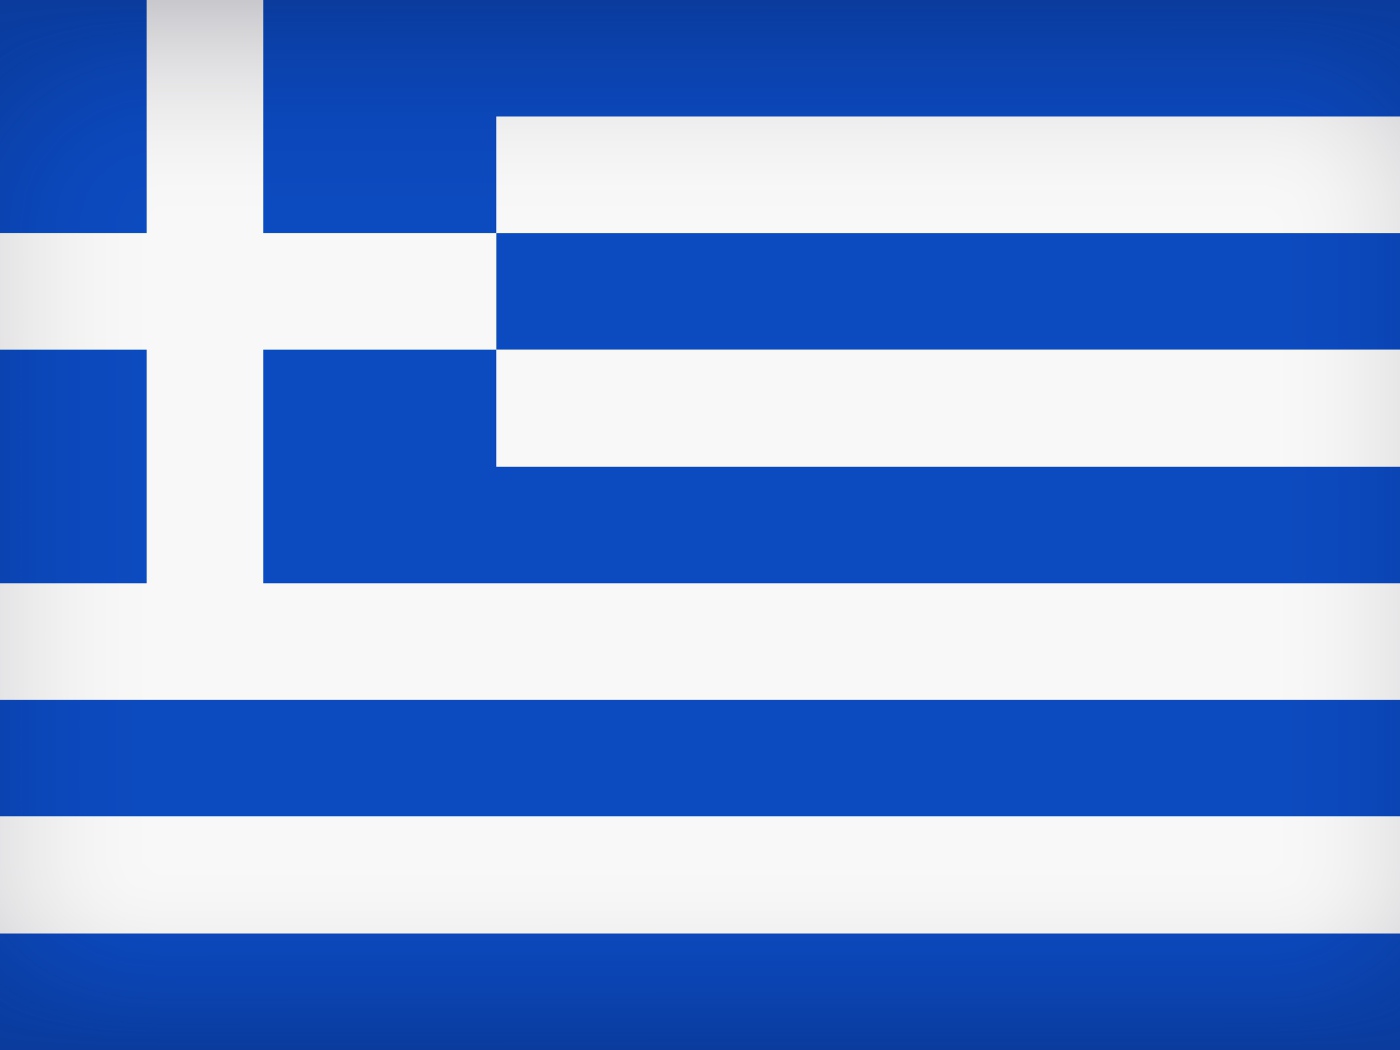 Blue and white flag of Greece